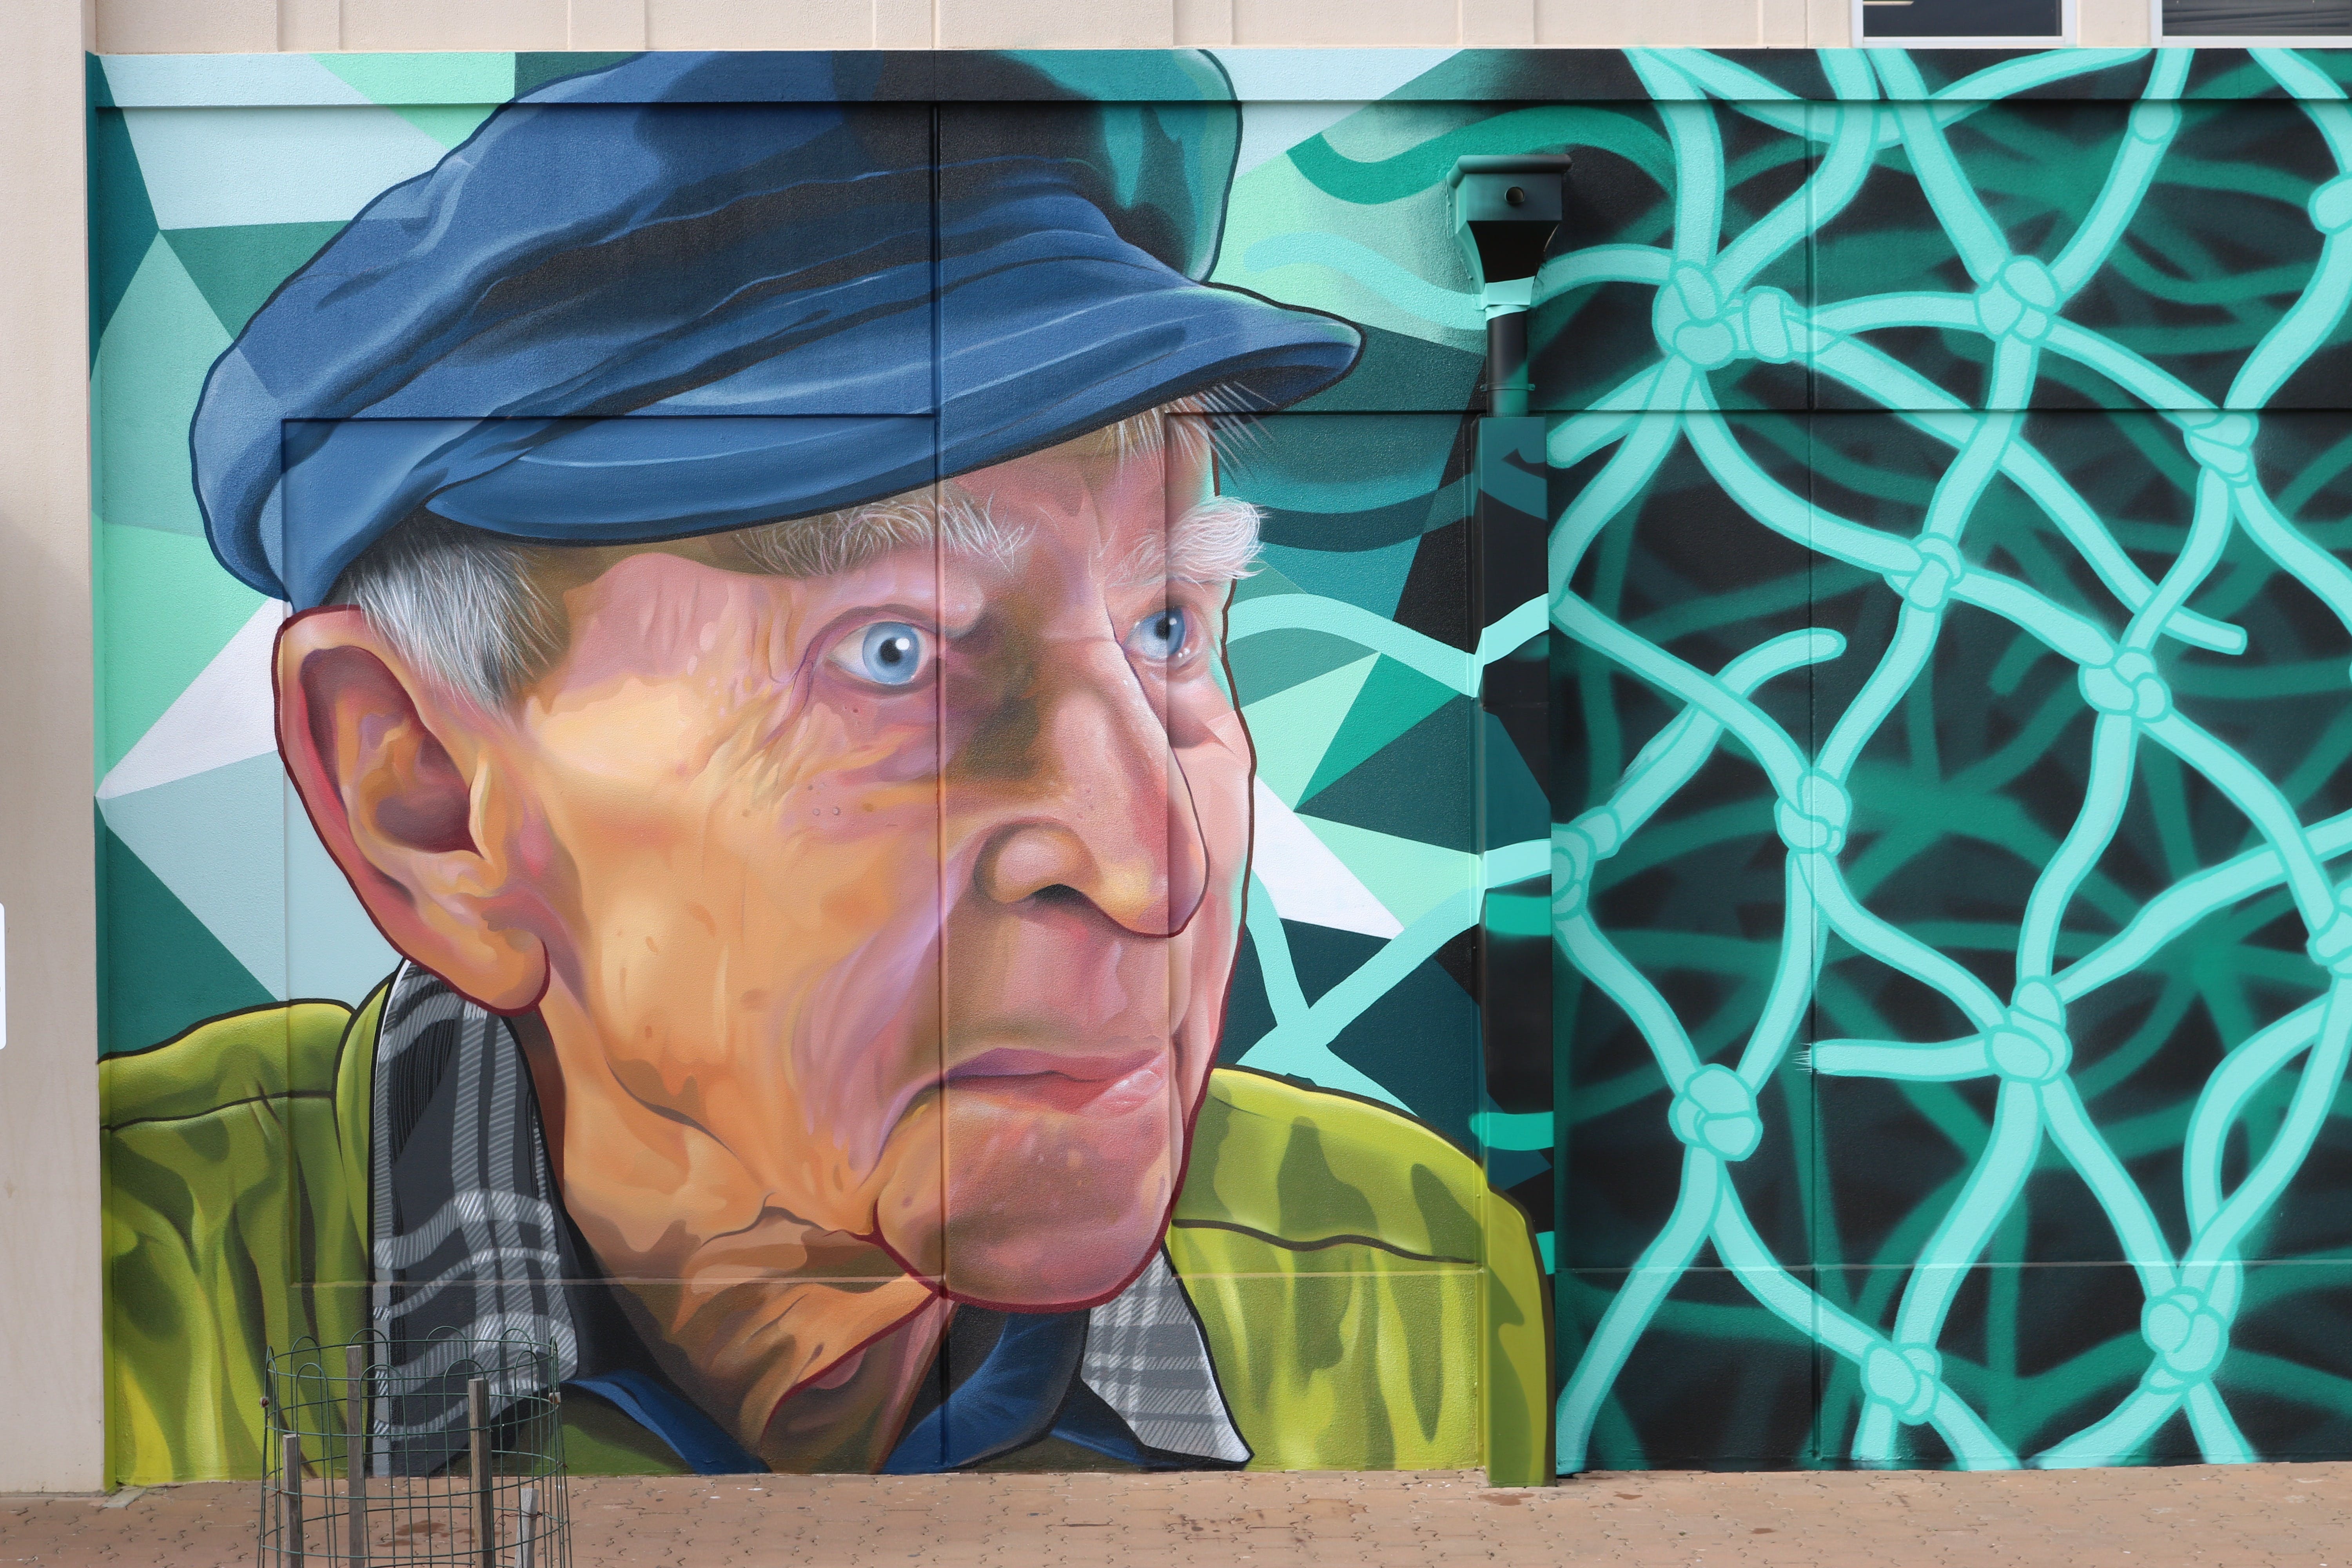 Port Pirie Mural Trail - Attractions Melbourne